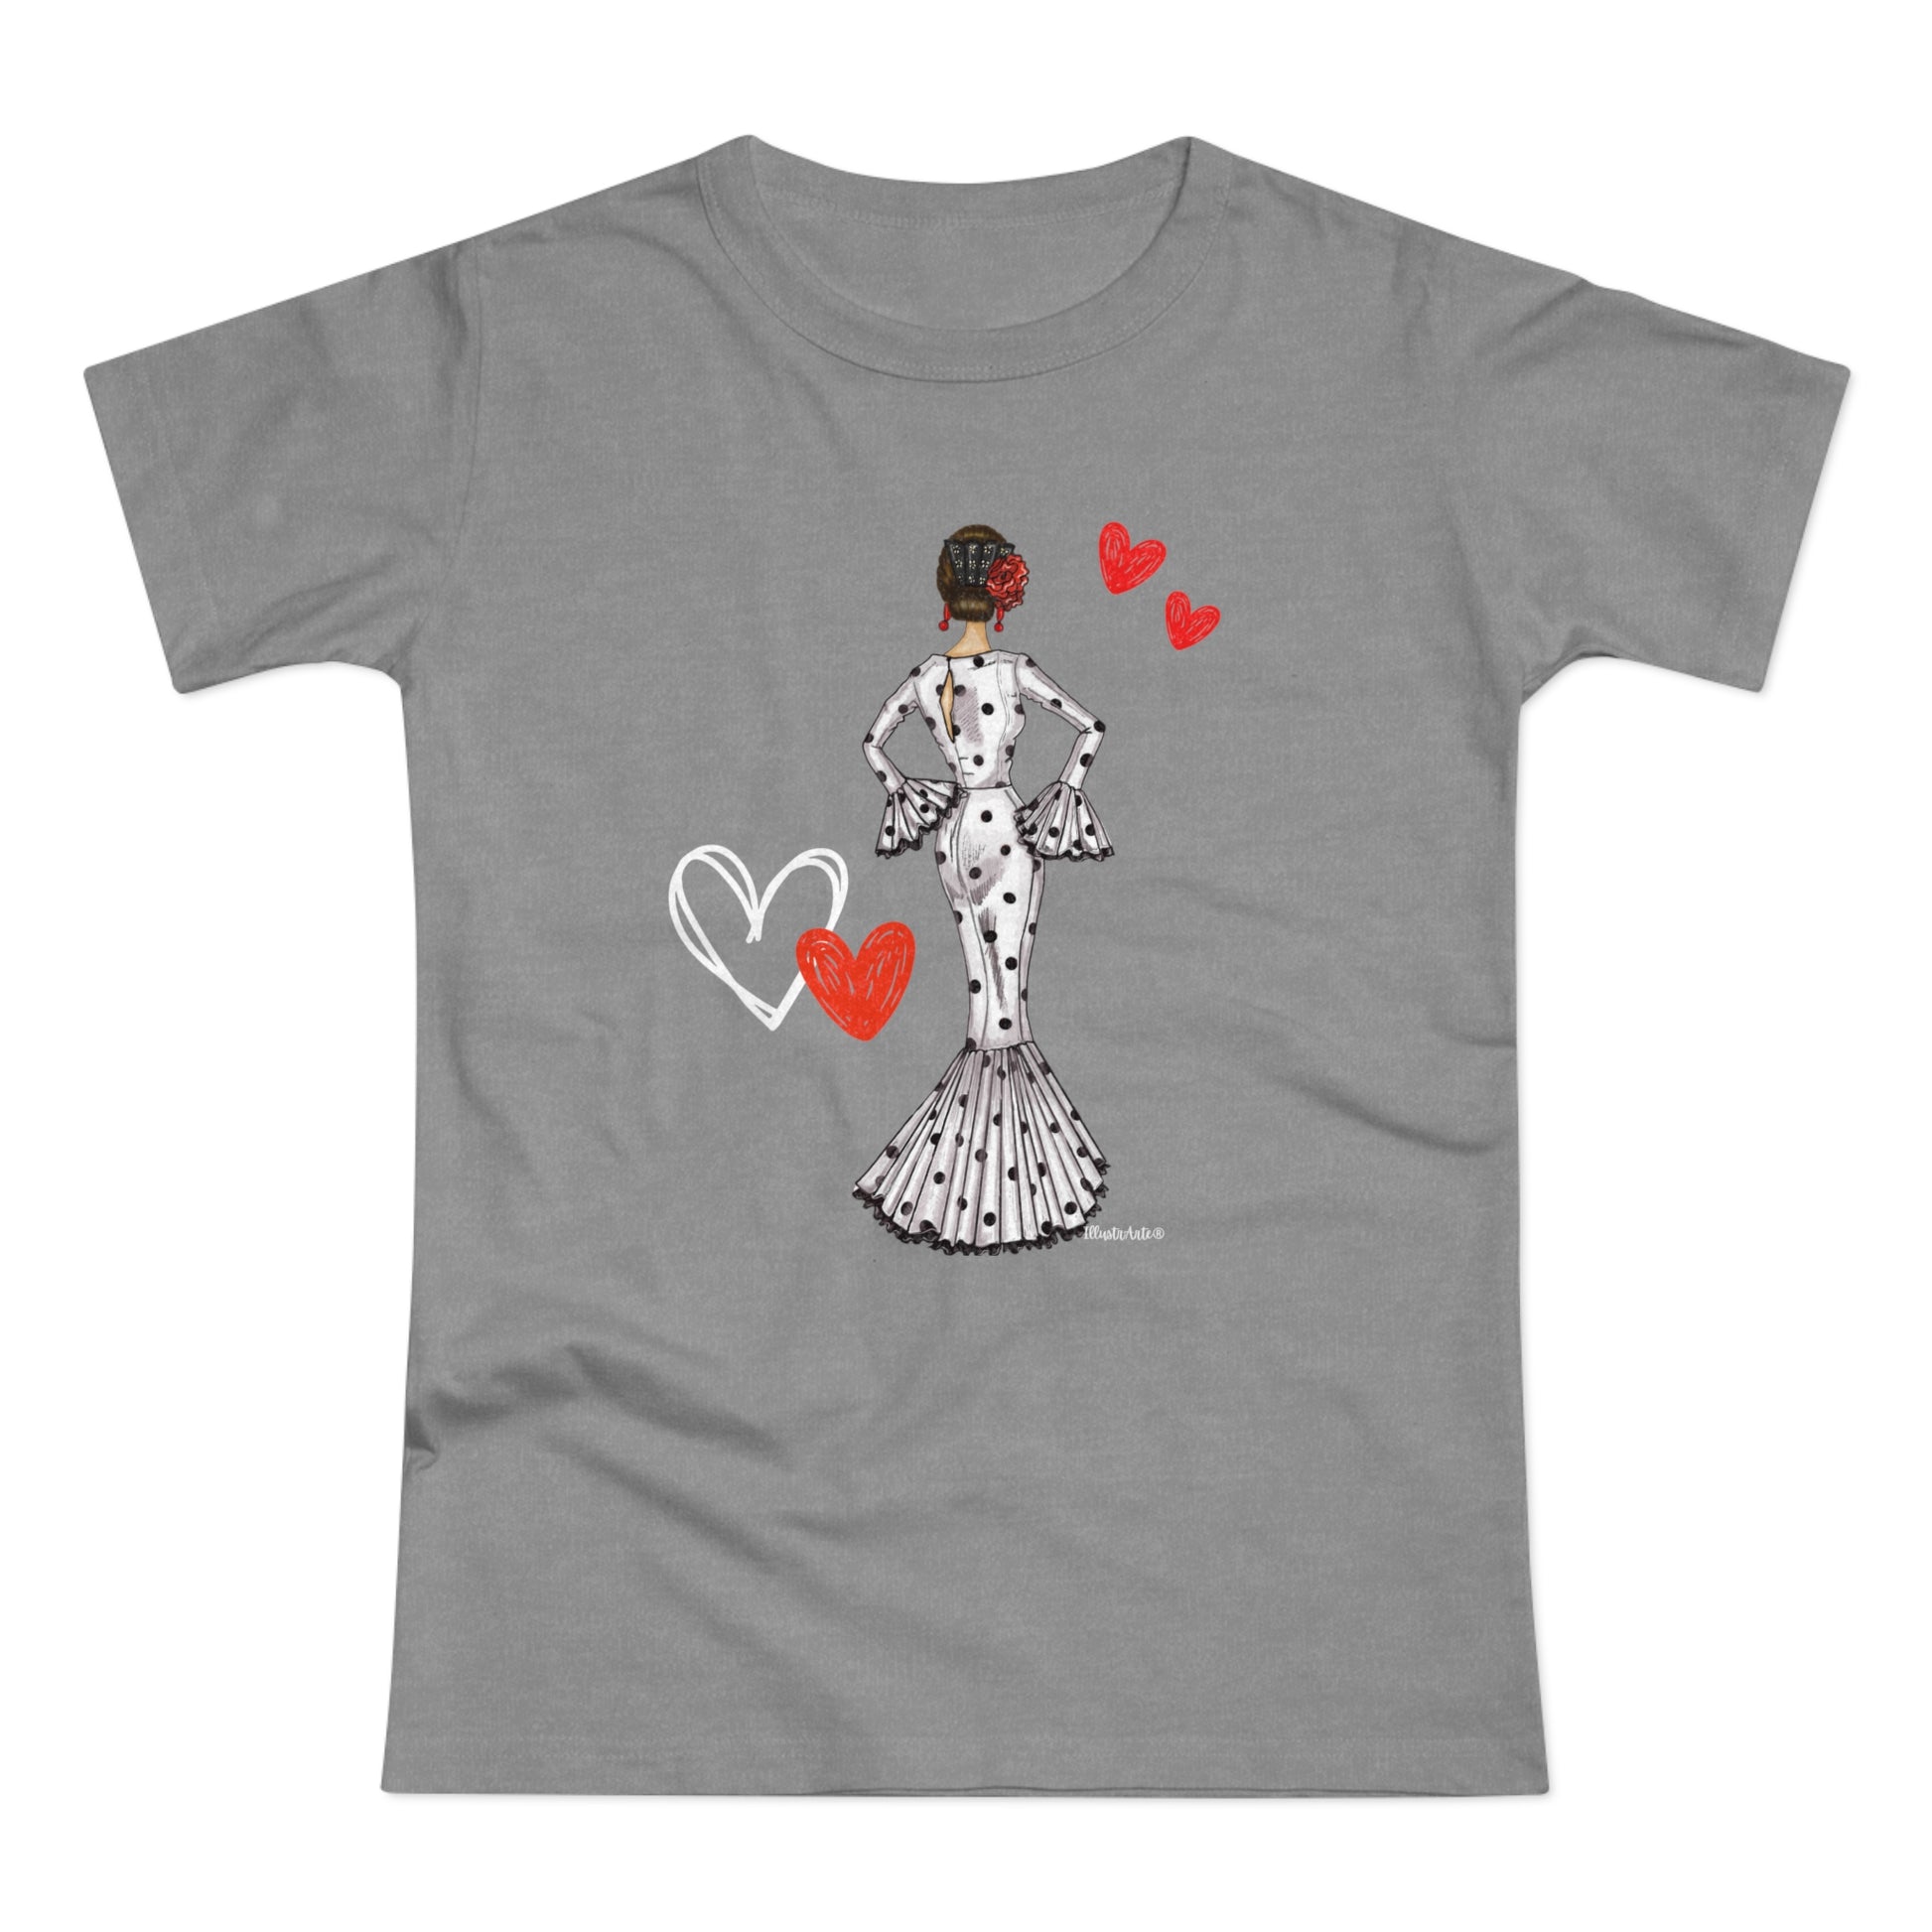 a t - shirt with an image of a woman holding a heart